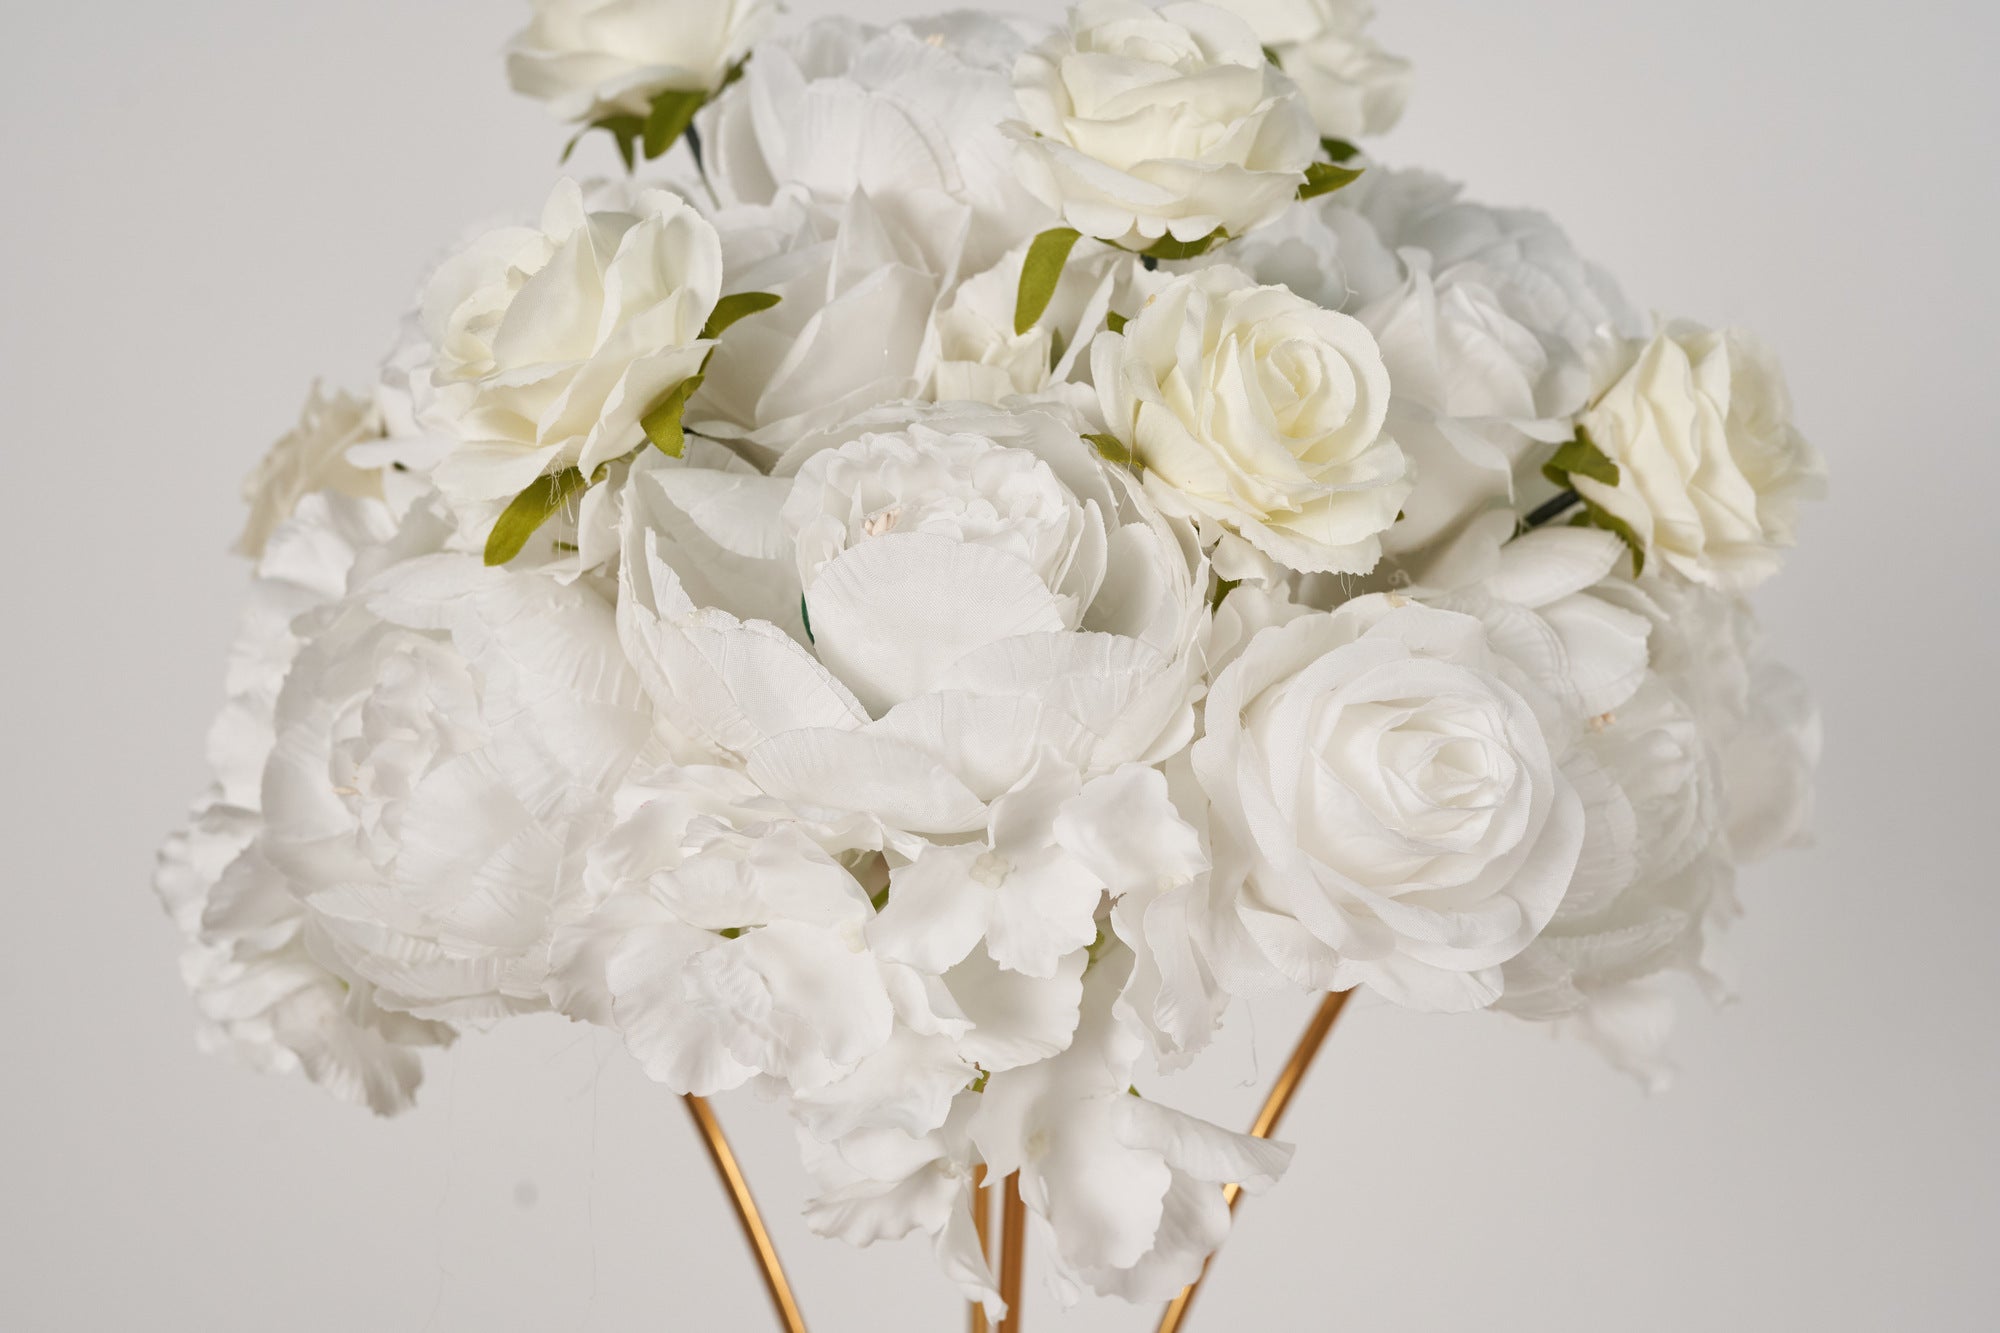 Flower Ball Pure White Wedding Proposal Party Centerpieces Decor